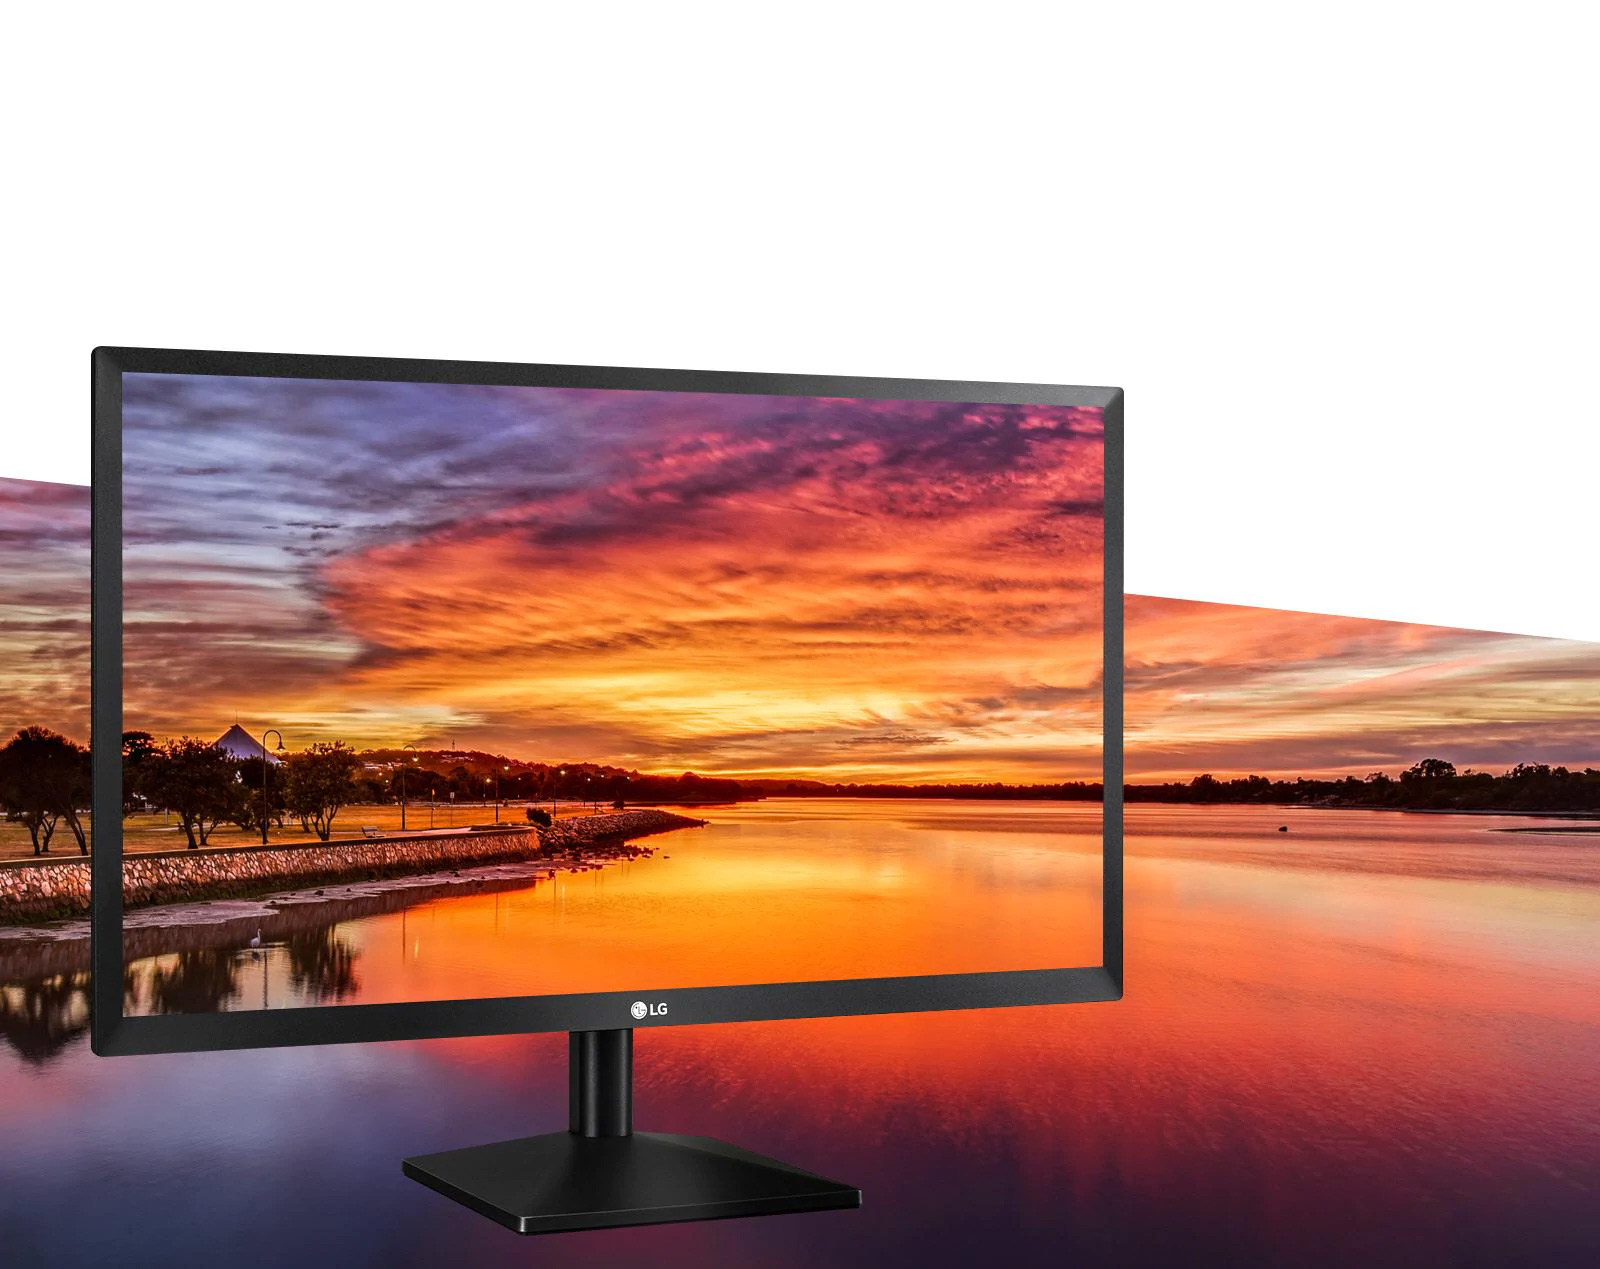 a monitor with a sunset view as screen